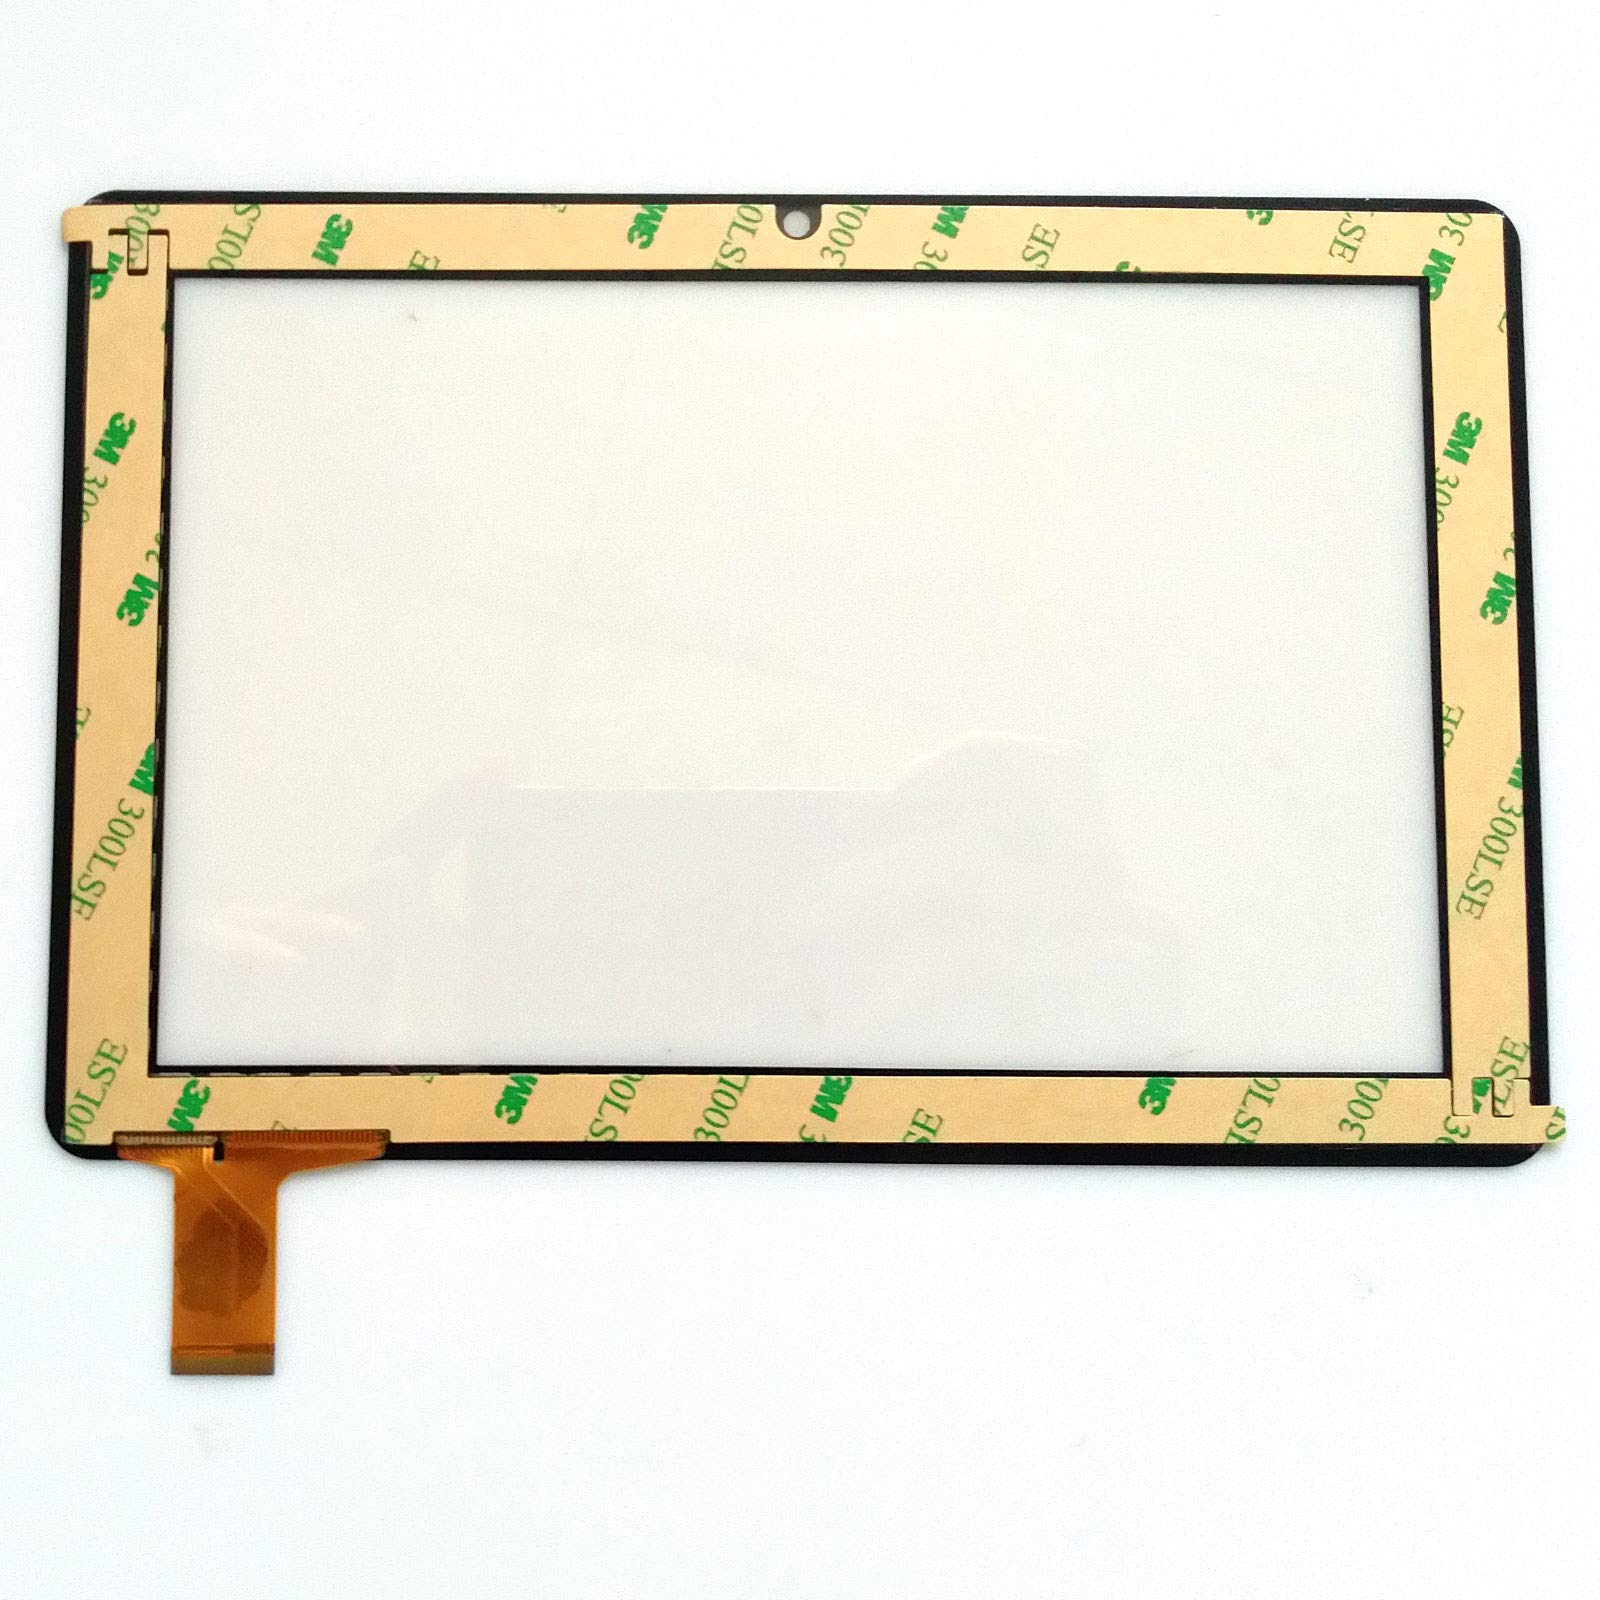 LCD EUTOPING R New 7 inch LCD Display Replacement LCD Display for 7